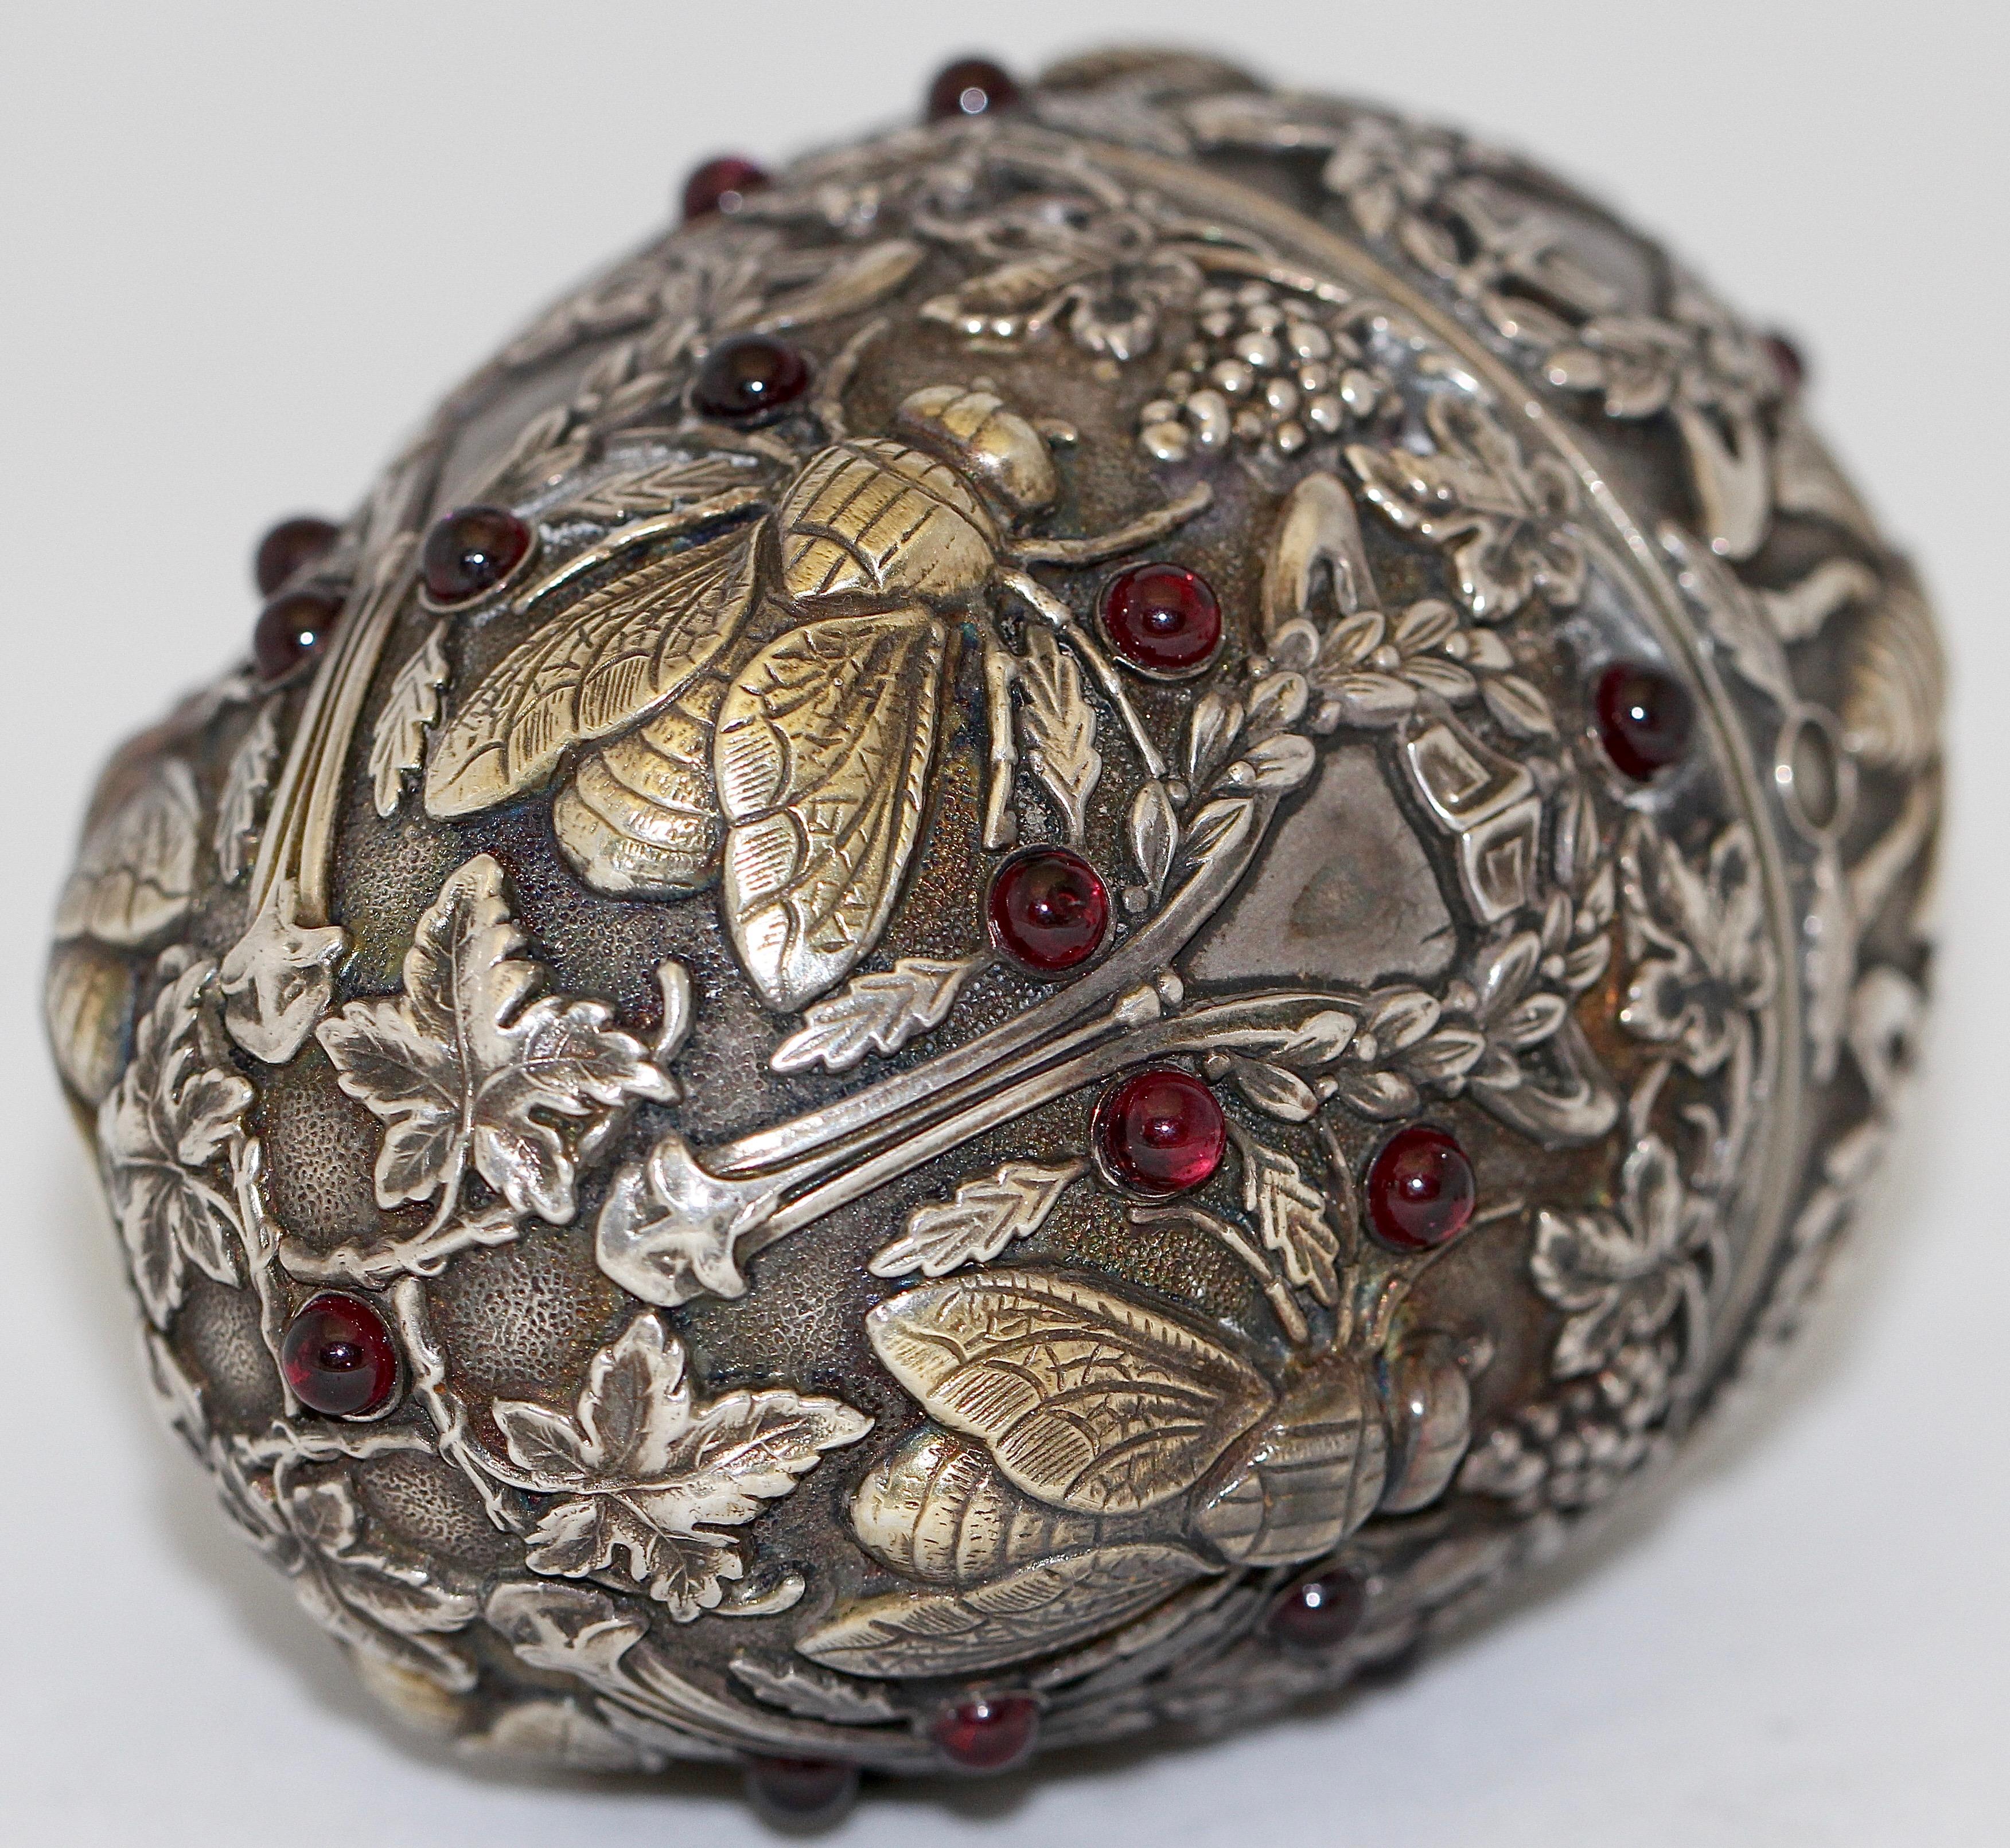 Pavel Ovchinnikov. Russian Faberge Style 84 silver insects Egg. With Garnets.

This magnificent Russian silver egg adorned with cabochon garnets throughout has a raised design depicting flies, bees, leaves and grape clusters.  Gold wash to interior.